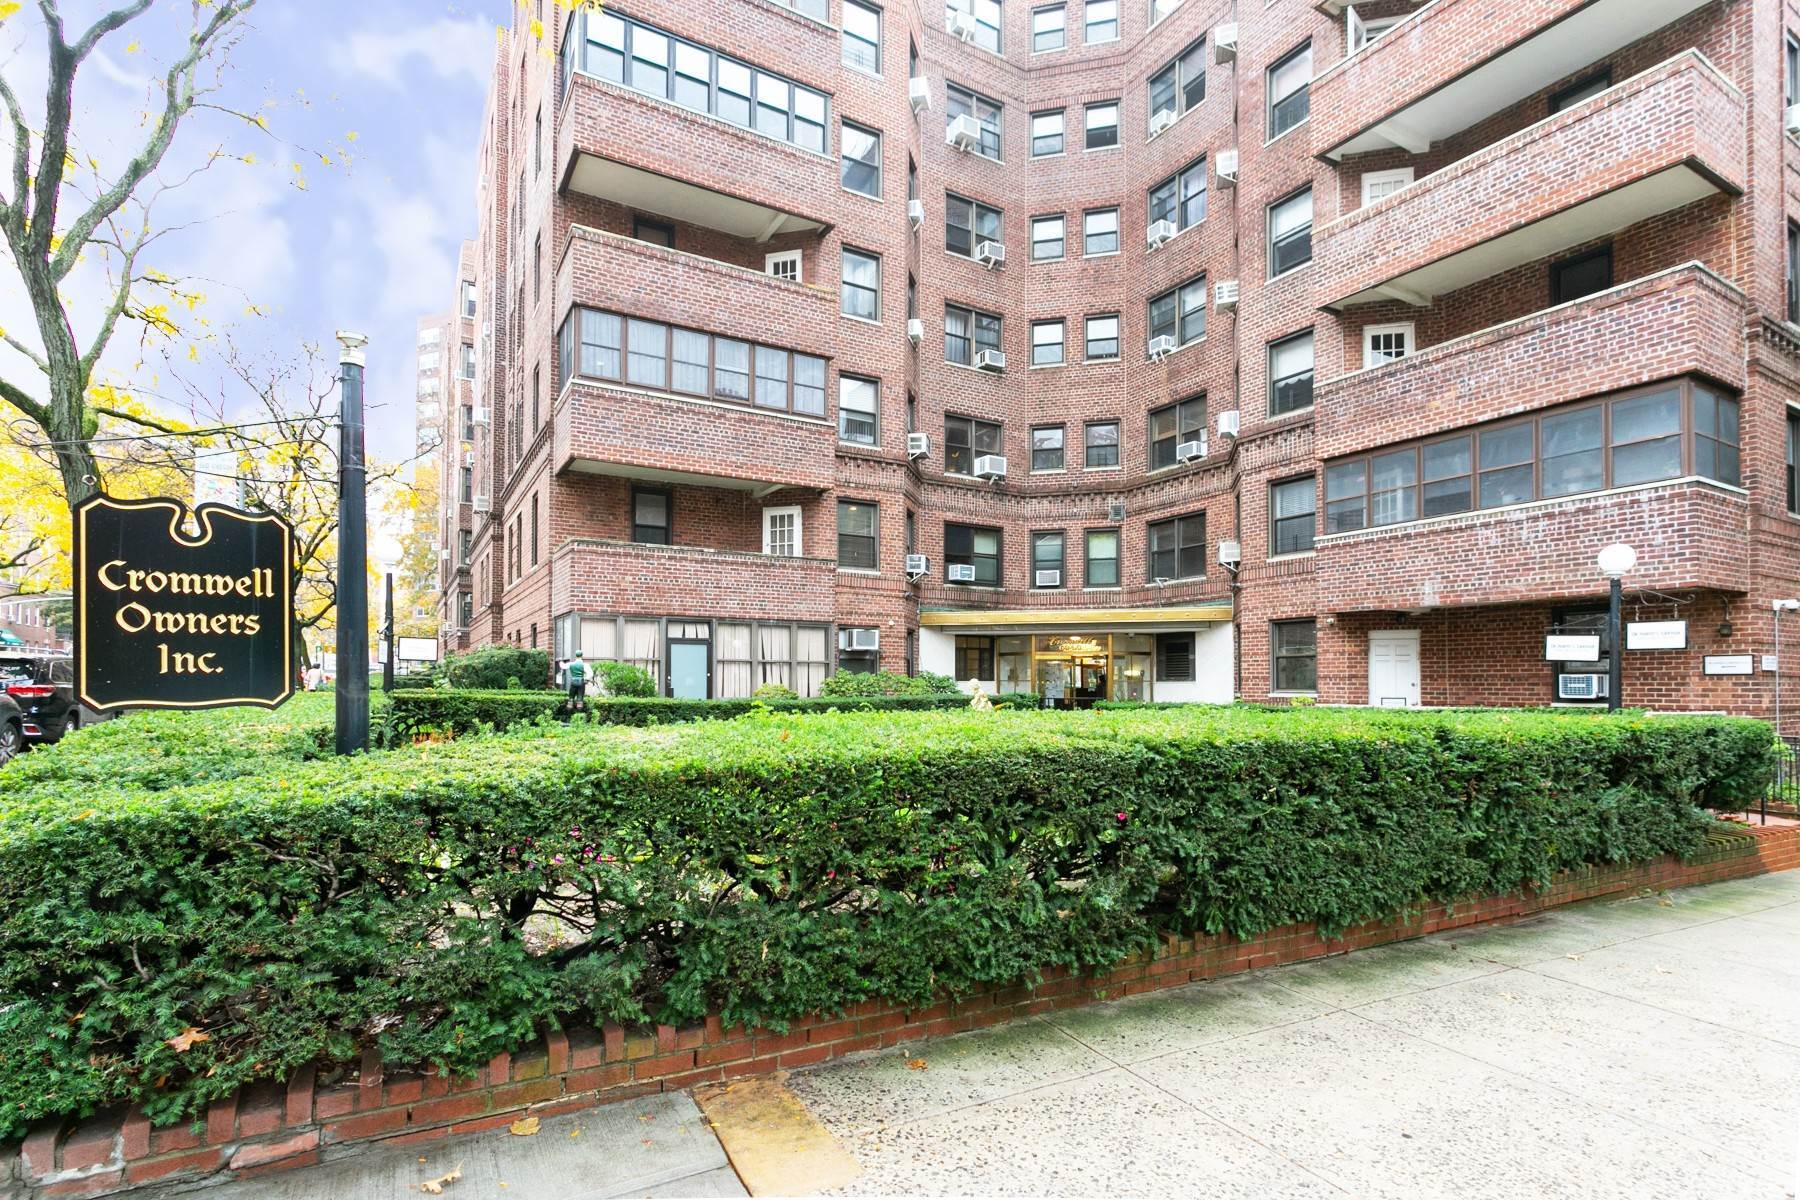 Co-op Properties for Sale at 'SPACIOUS TWO BEDROOM COOP IN PRESTIGIOUS FOREST HILLS BUILDING' 69-60 108th Street, #316 Forest Hills, New York 11375 United States